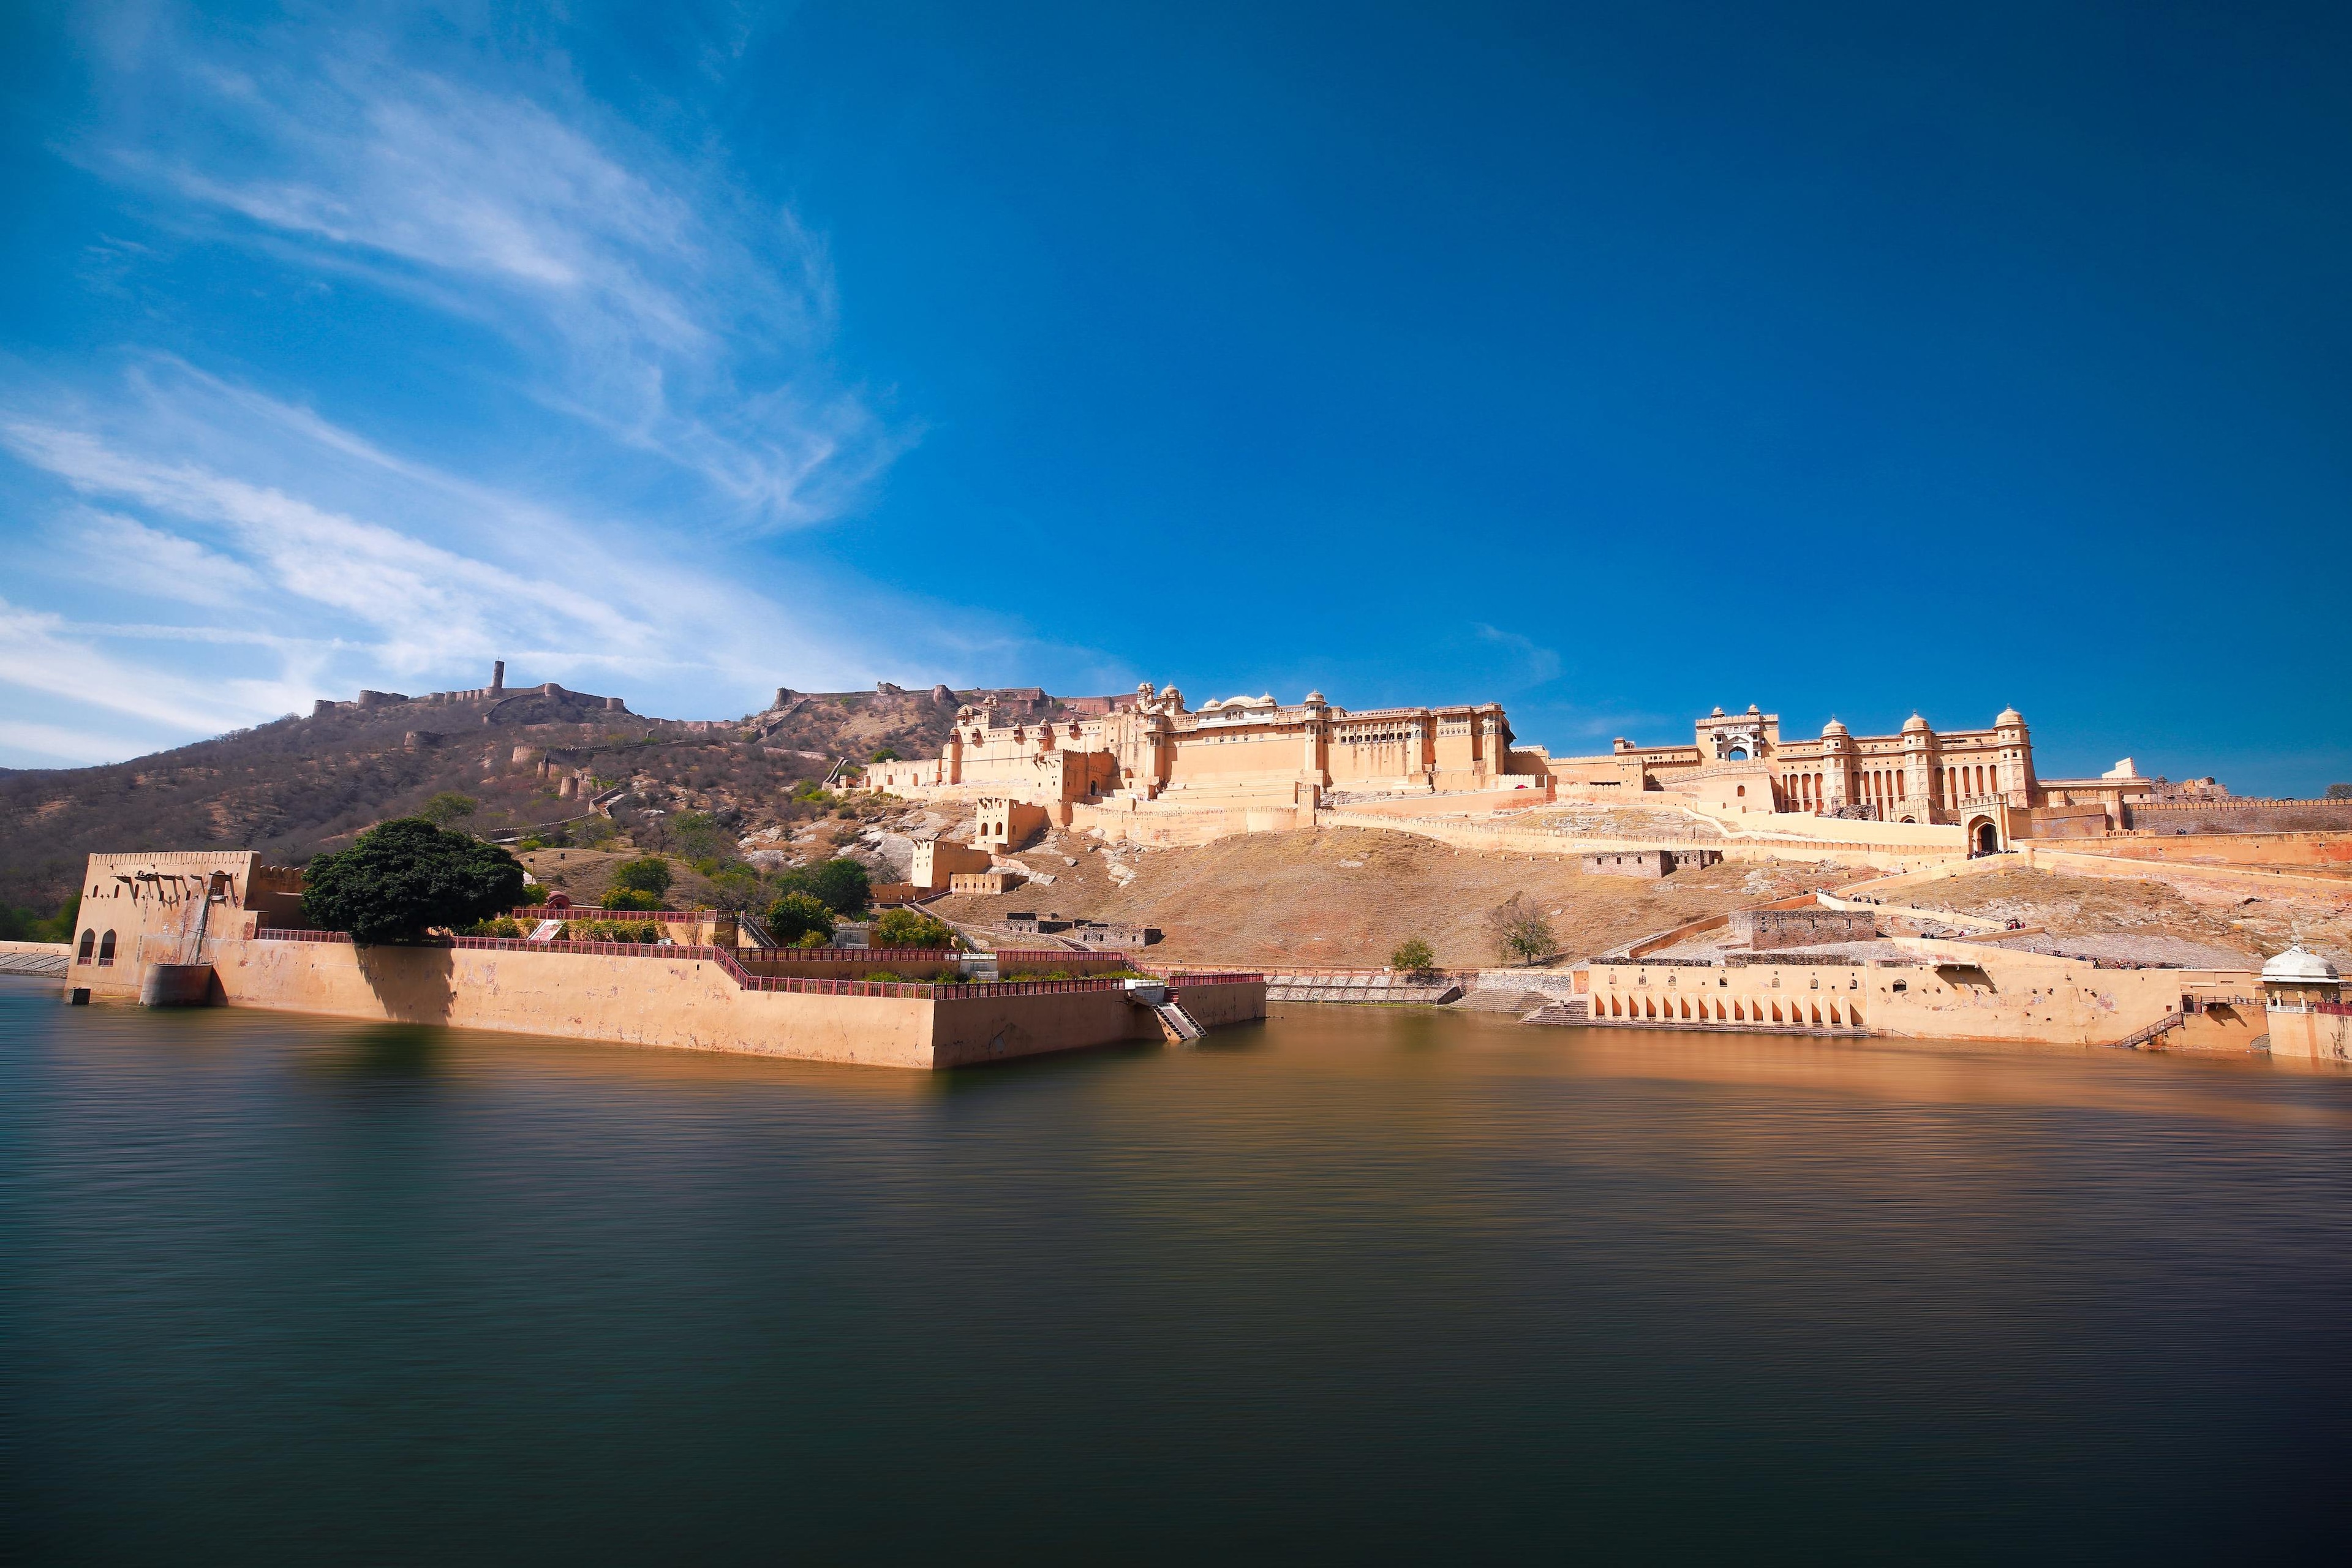 Amer Fort, Jaipur: Ticket Price, History, Timings & Things to Do